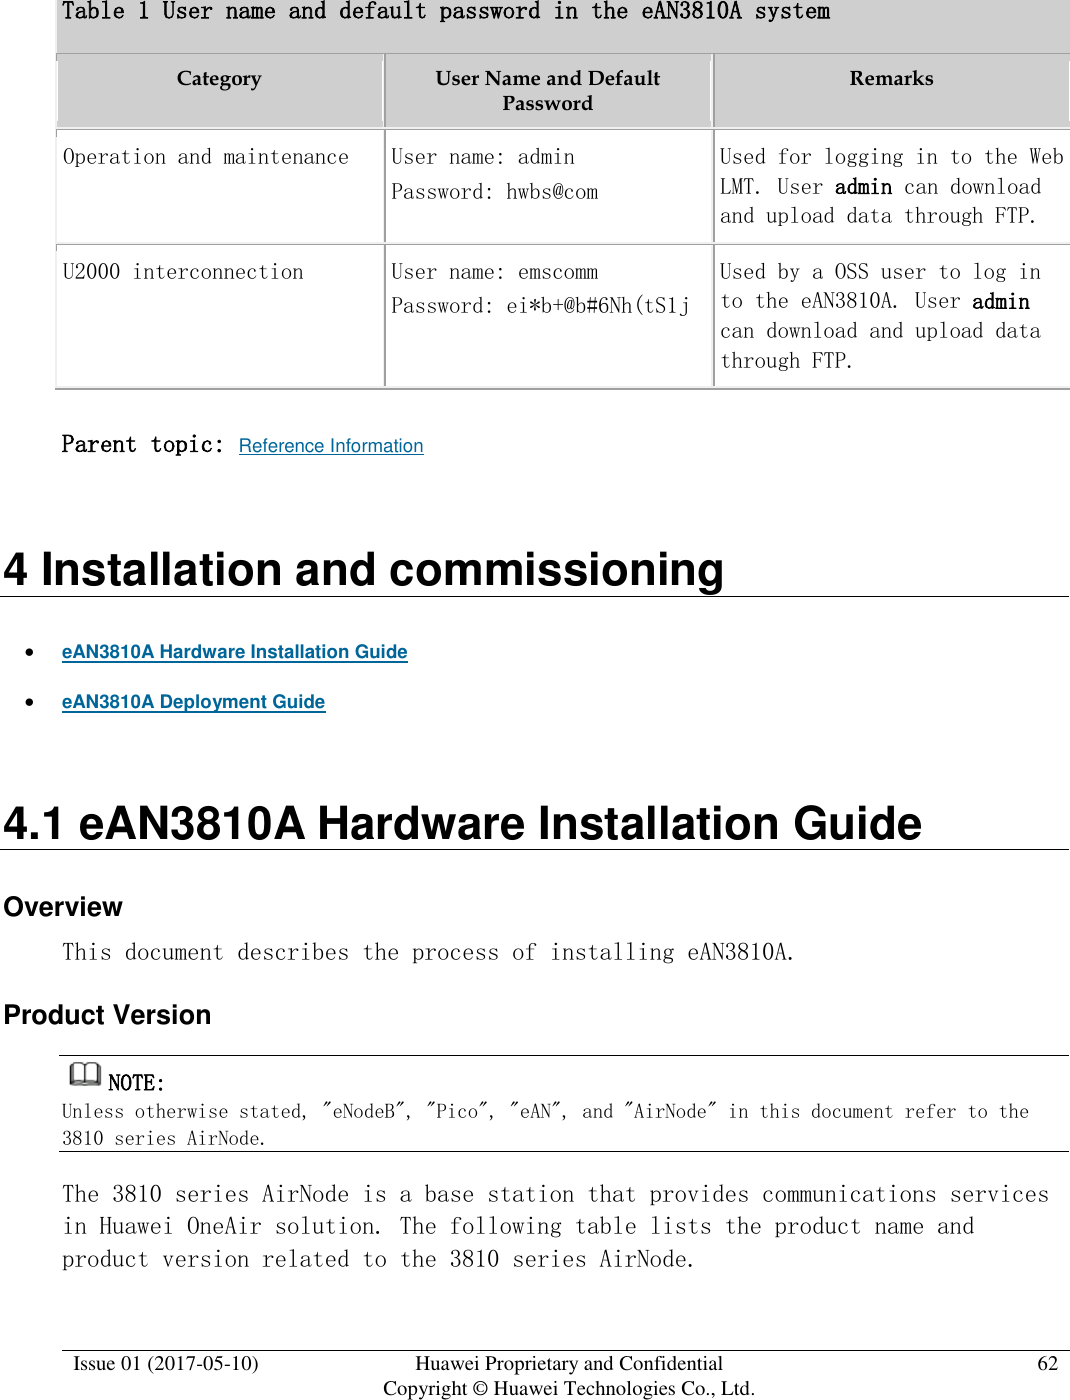  Issue 01 (2017-05-10) Huawei Proprietary and Confidential      Copyright © Huawei Technologies Co., Ltd. 62  Table 1 User name and default password in the eAN3810A system Category  User Name and Default Password Remarks  Operation and maintenance User name: admin  Password: hwbs@com  Used for logging in to the Web LMT. User admin can download and upload data through FTP. U2000 interconnection User name: emscomm  Password: ei*b+@b#6Nh(tS1j  Used by a OSS user to log in to the eAN3810A. User admin can download and upload data through FTP. Parent topic: Reference Information 4 Installation and commissioning  eAN3810A Hardware Installation Guide  eAN3810A Deployment Guide 4.1 eAN3810A Hardware Installation Guide Overview This document describes the process of installing eAN3810A. Product Version NOTE:  Unless otherwise stated, &quot;eNodeB&quot;, &quot;Pico&quot;, &quot;eAN&quot;, and &quot;AirNode&quot; in this document refer to the 3810 series AirNode.  The 3810 series AirNode is a base station that provides communications services in Huawei OneAir solution. The following table lists the product name and product version related to the 3810 series AirNode.  